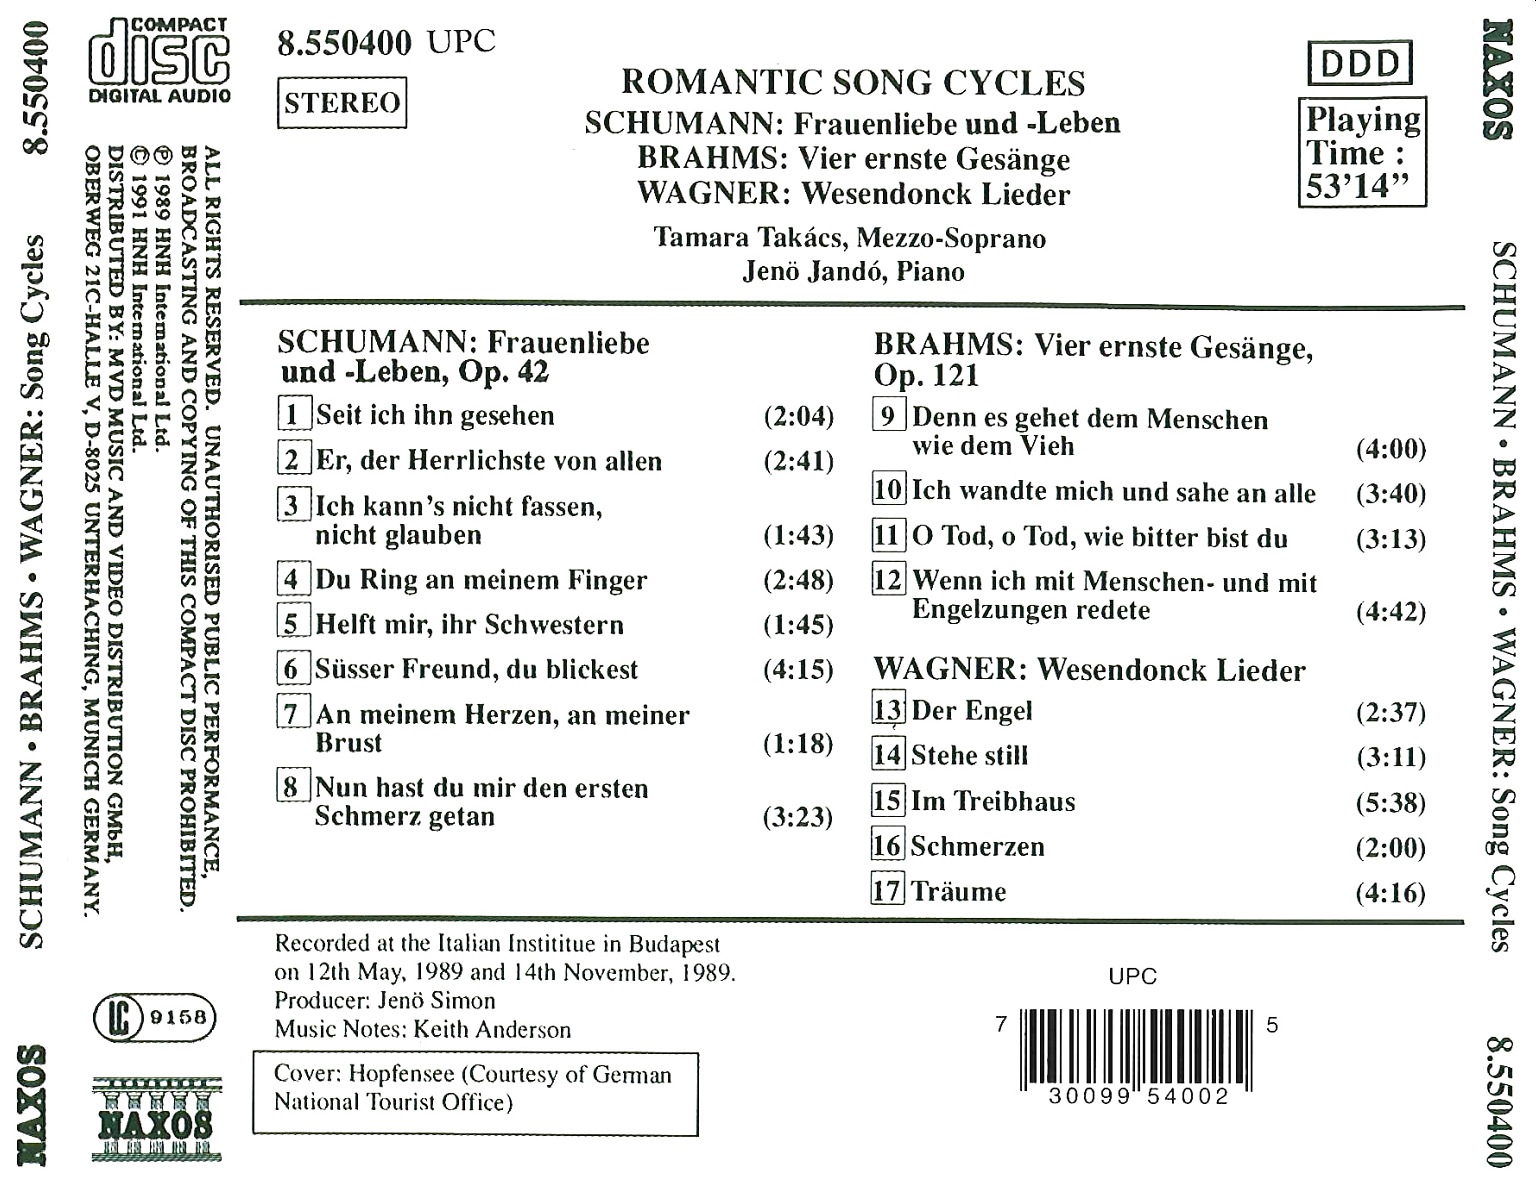 Romantic Song Cycles: Schumann / Brahms / Wagner - slide-1